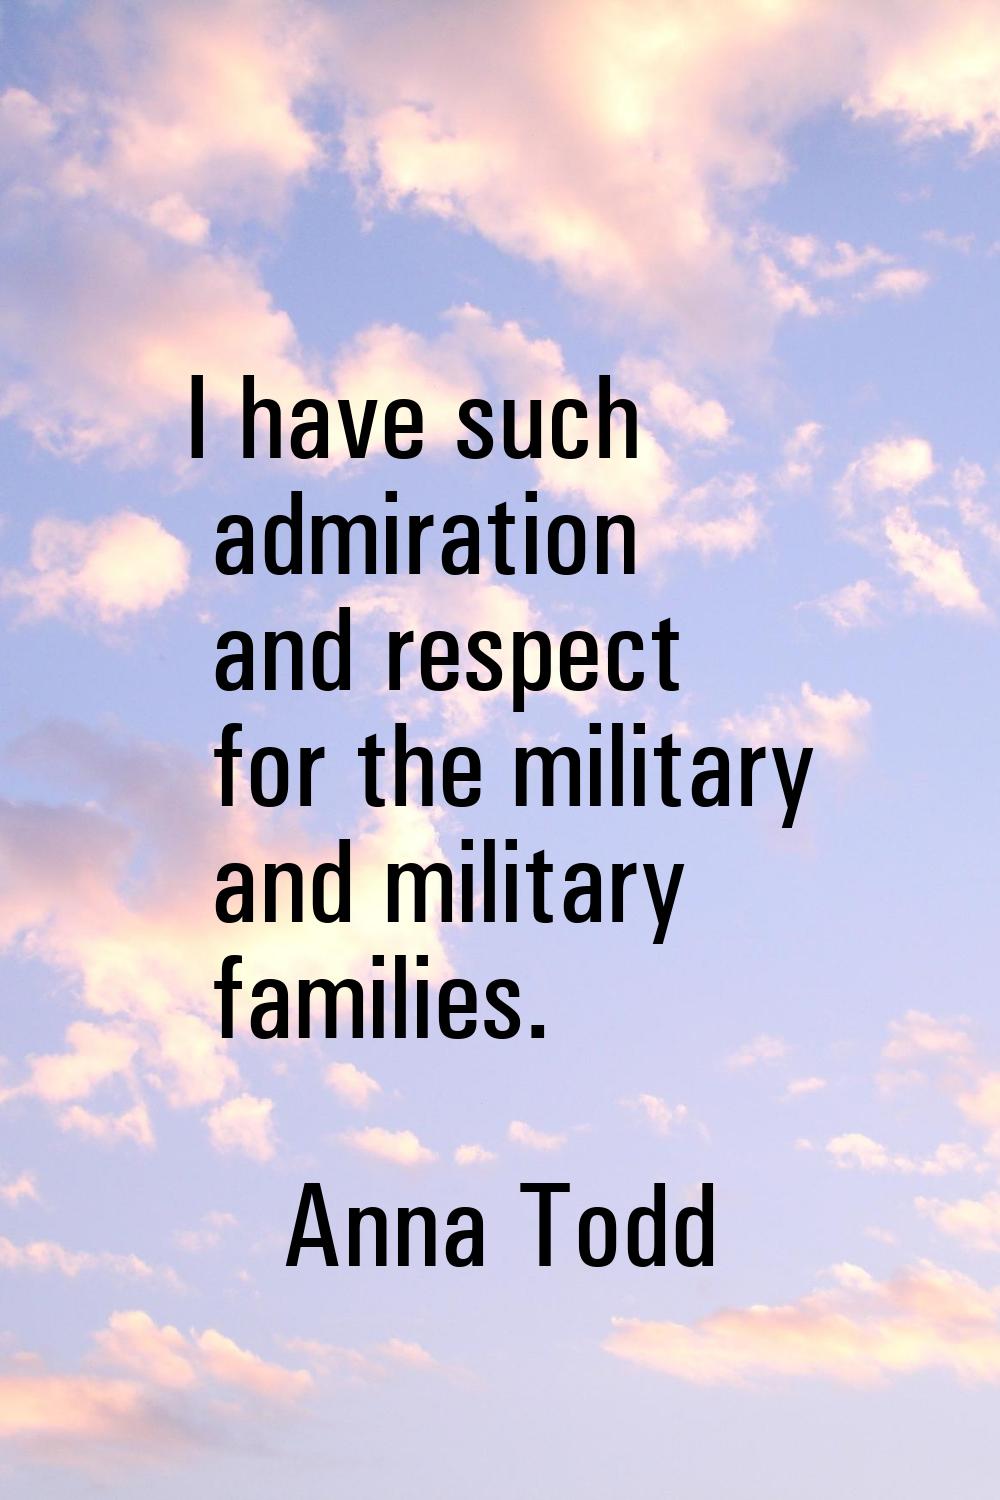 I have such admiration and respect for the military and military families.